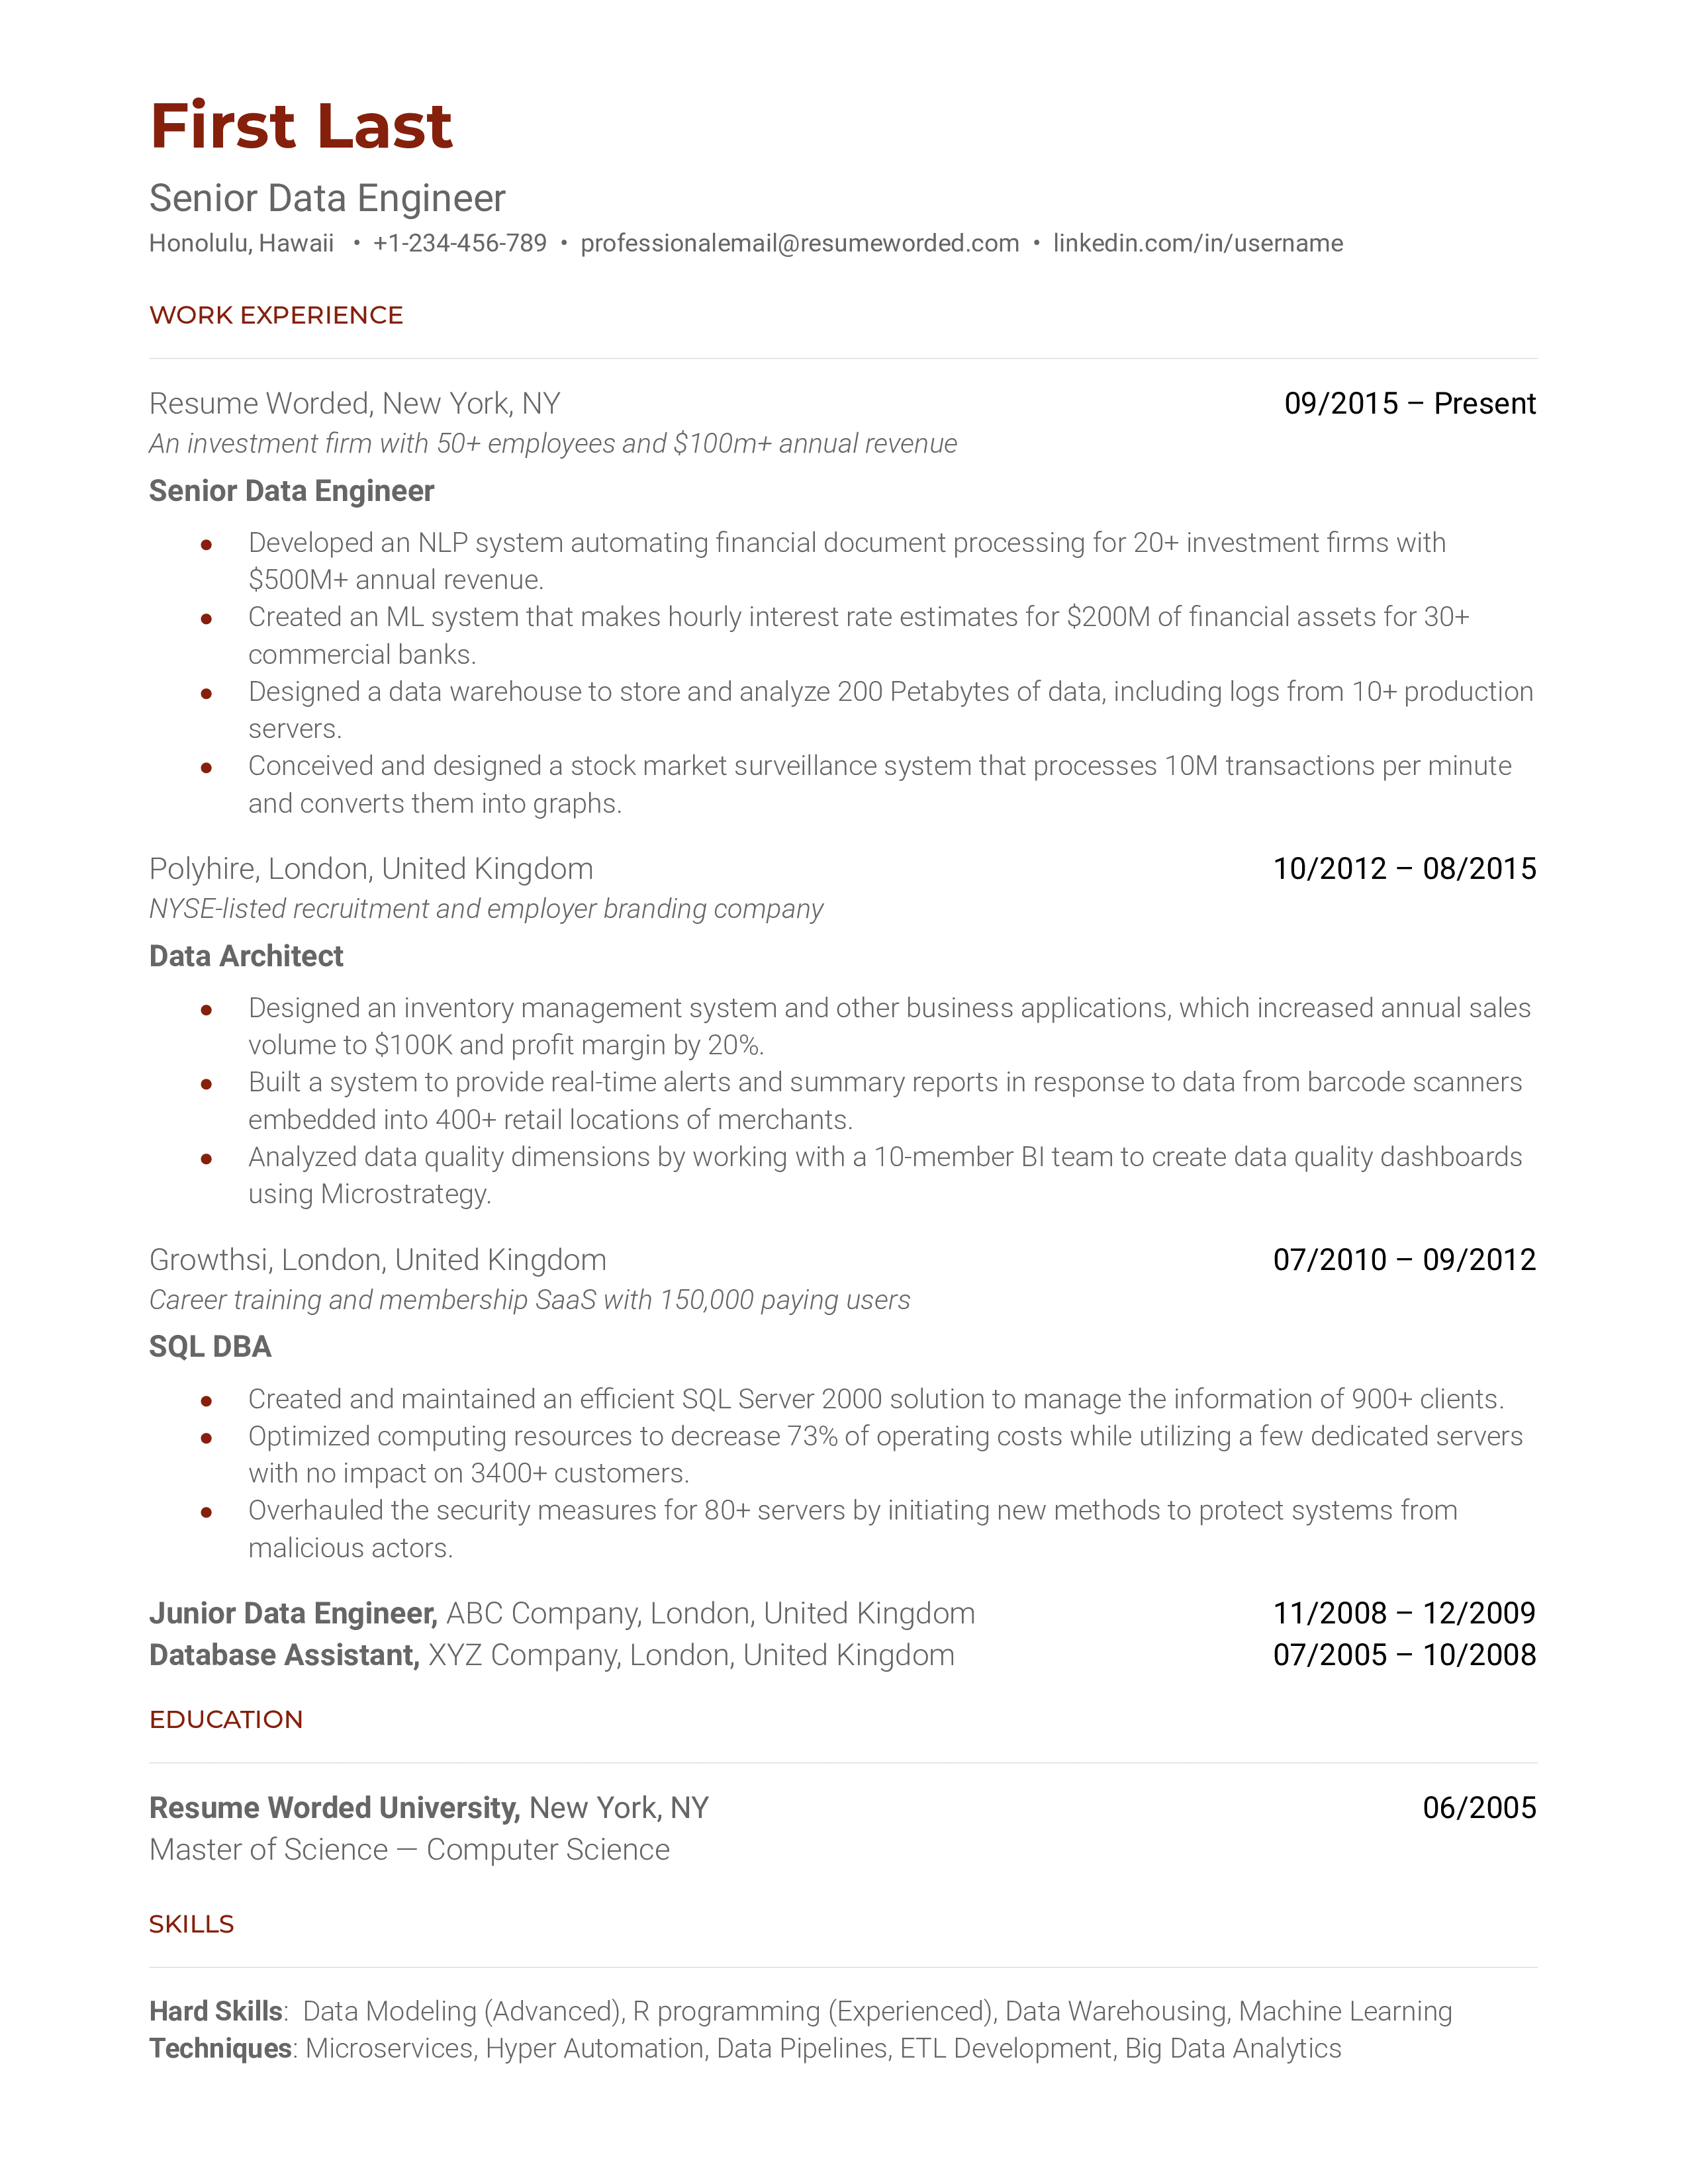 Senior data engineer CV showcasing technical skills and project impacts.